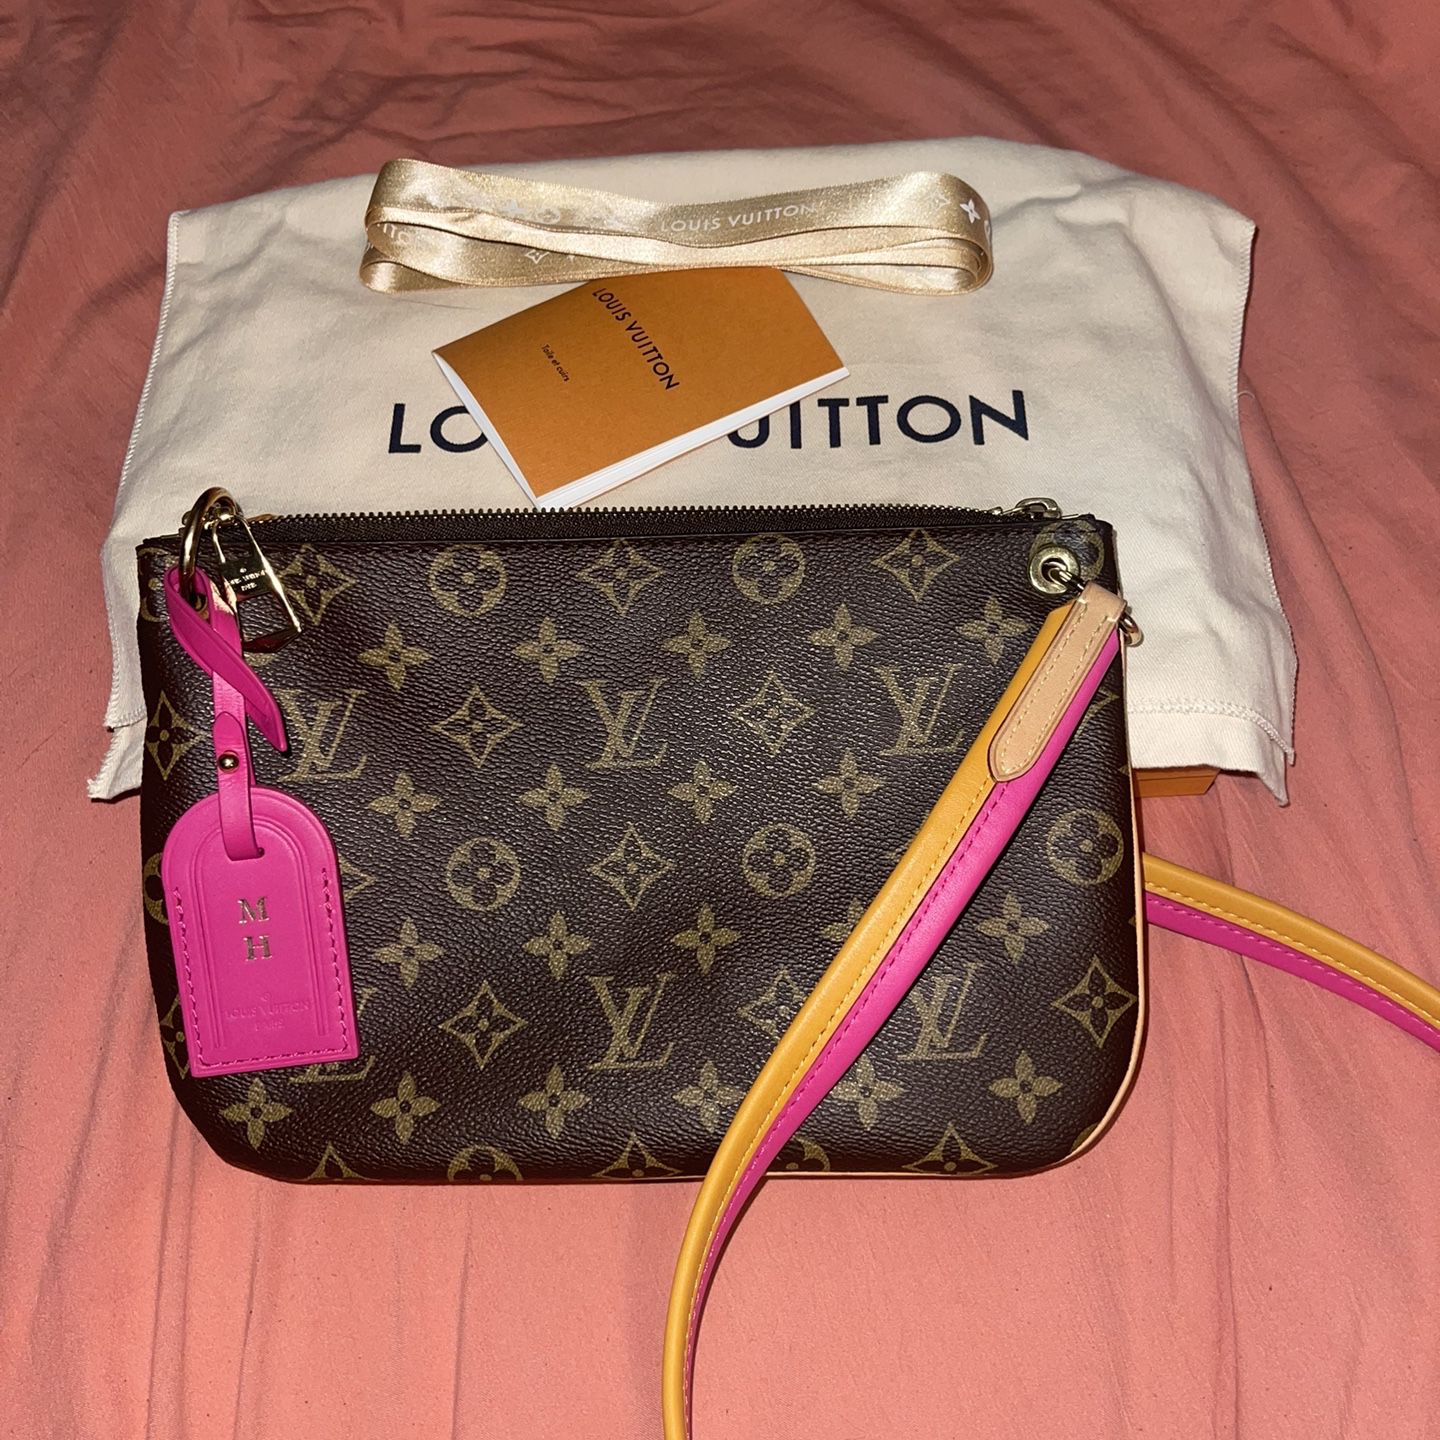 Authentic Louis Vuitton classic color crossbody bag, leather shoulder bag, envelope  bag. Sold at low price for Sale in Jackson, MI - OfferUp